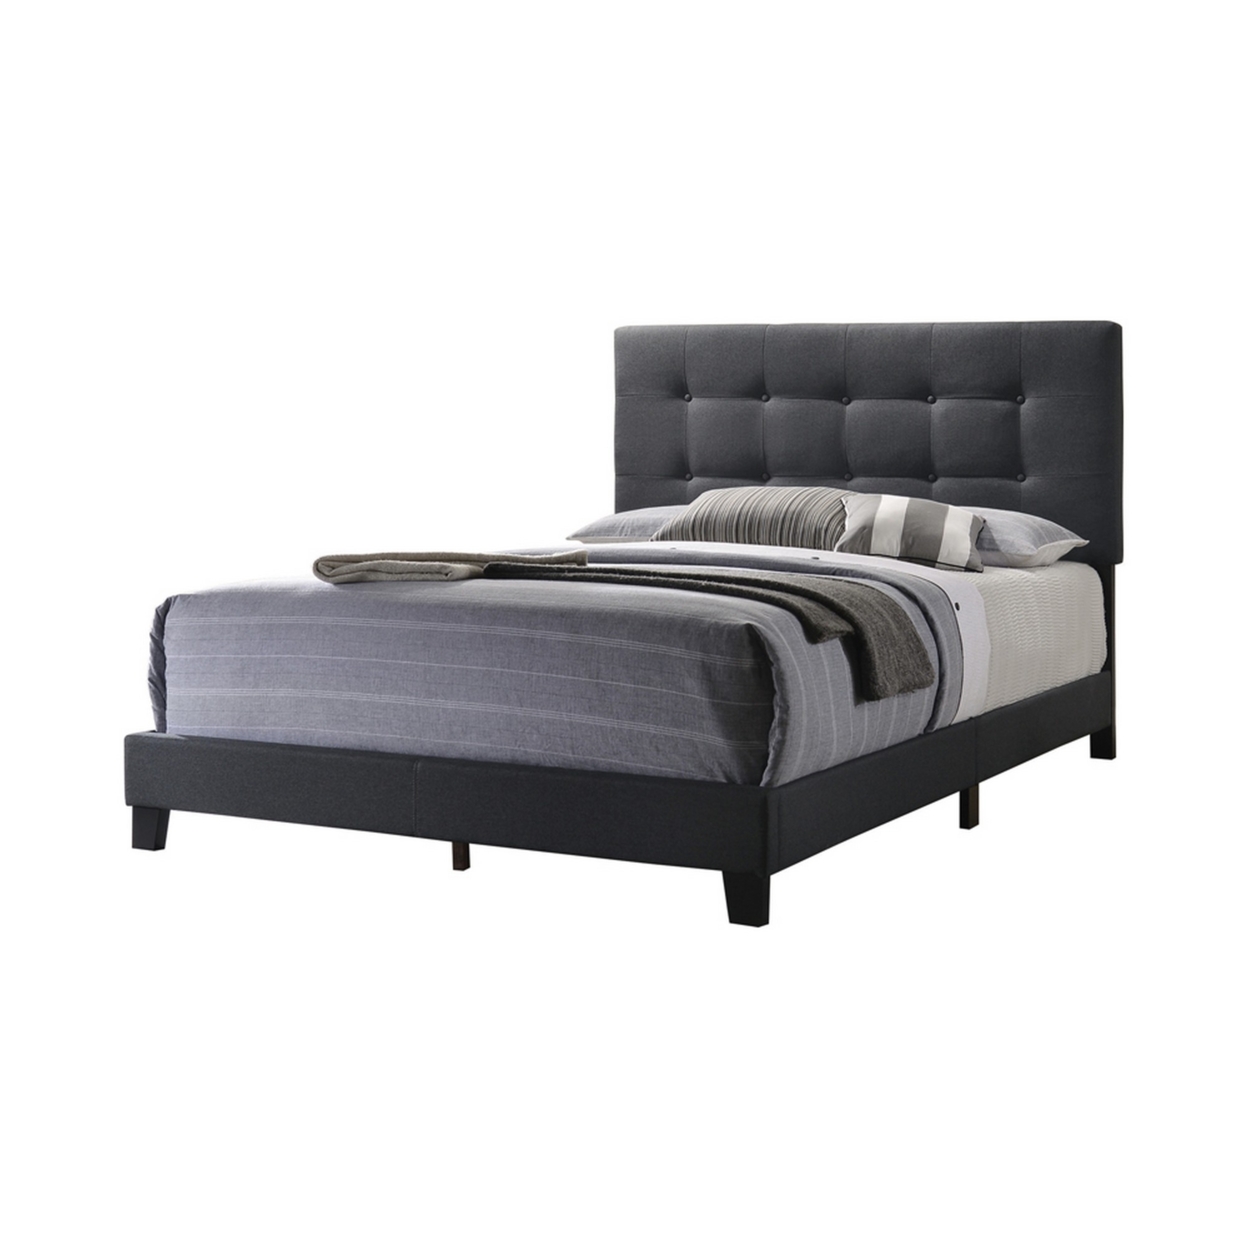 Eastern King Bed With Square Button Tufted Headboard, Dark Gray- Saltoro Sherpi